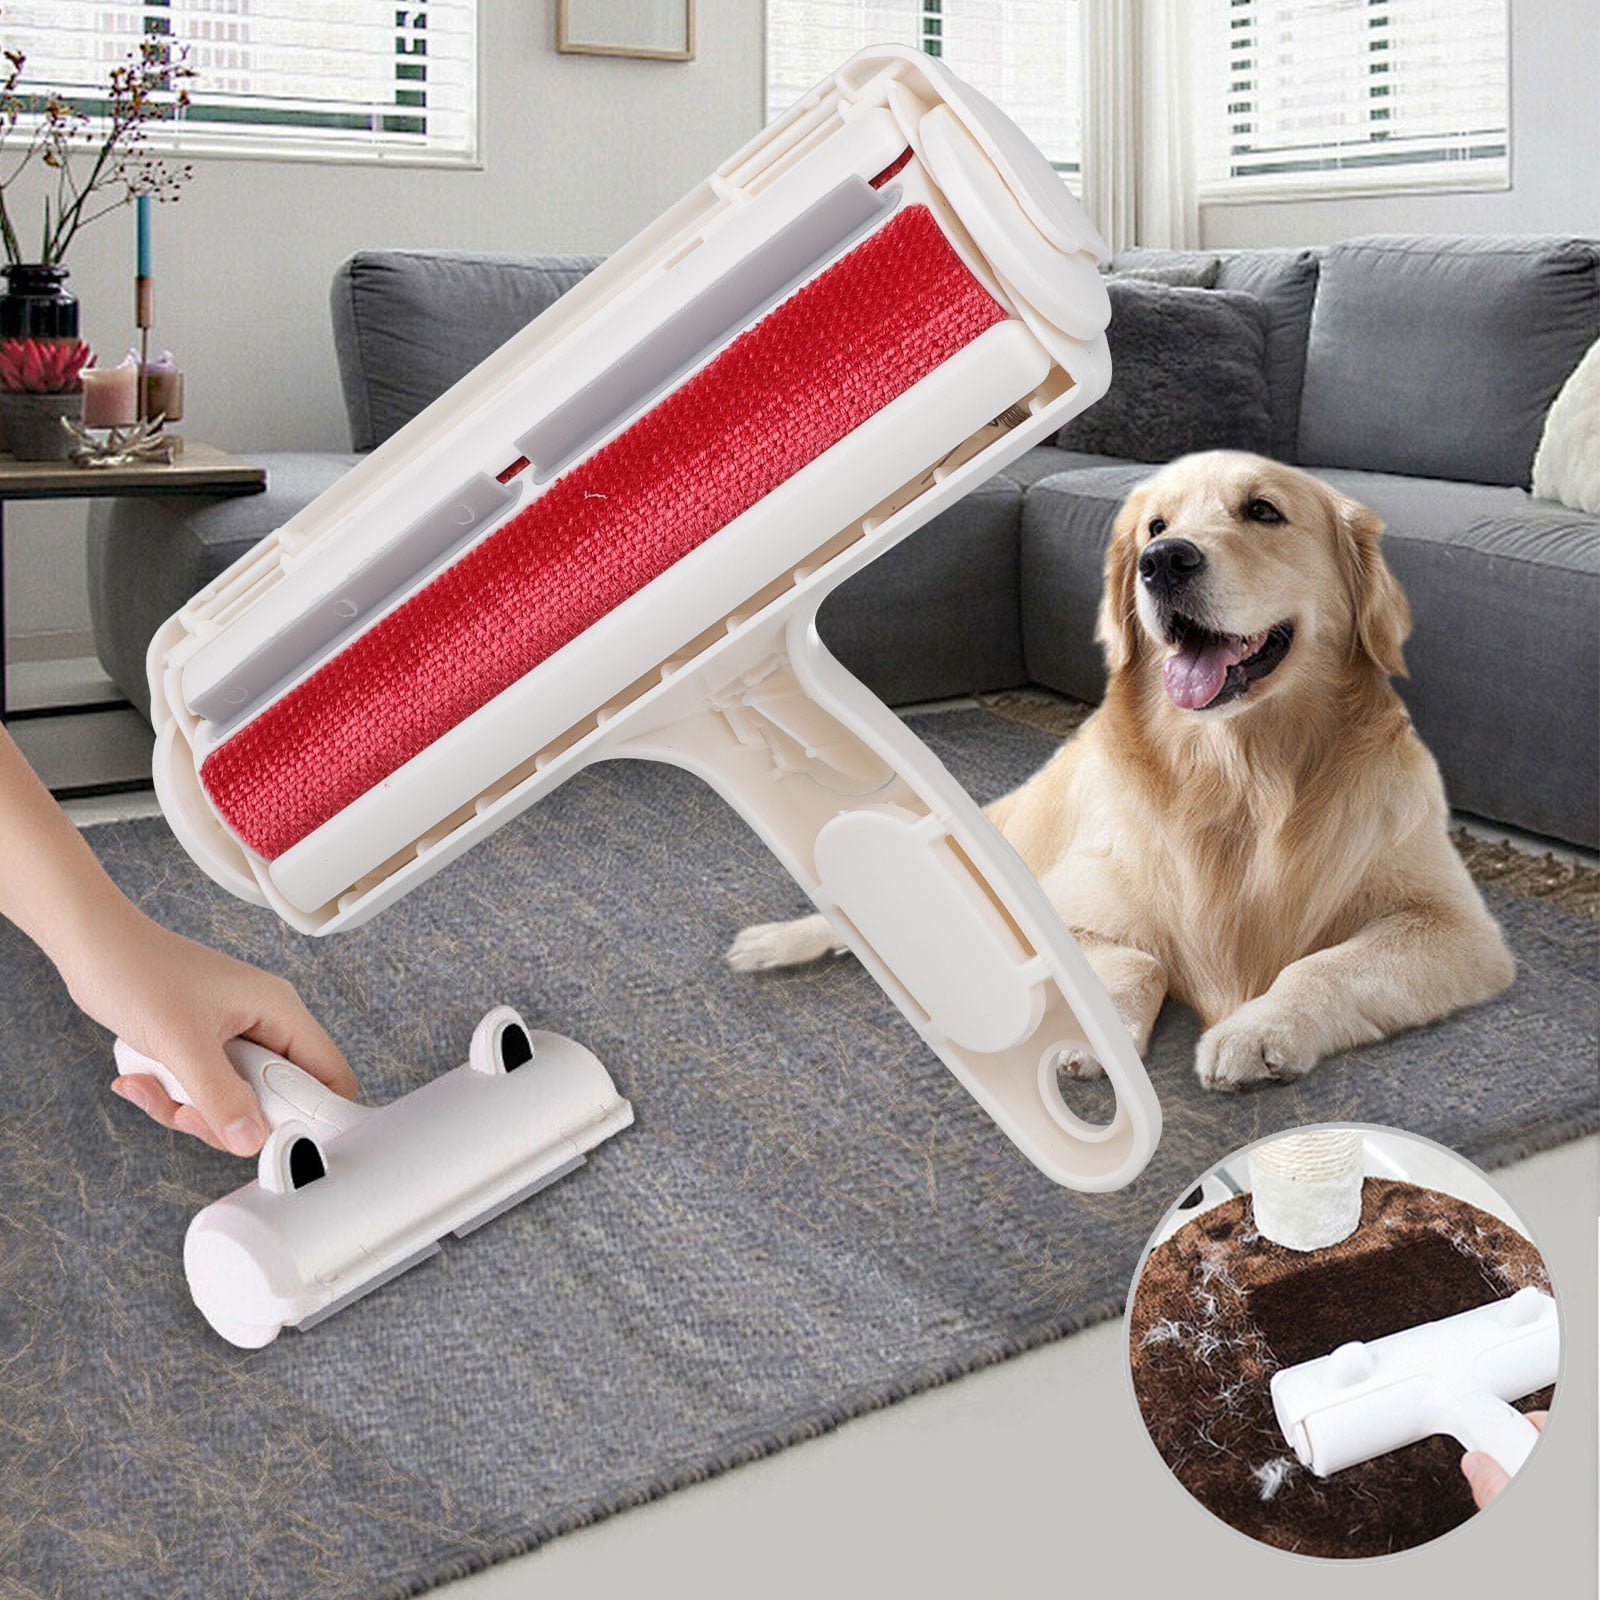 Livememory Lint Roller Pet Hair Lint Removers for Clothes Dog Cat Car with 2 Lint Brush & 4 Refills 60 Sheet/Roll 360 Sheets Total